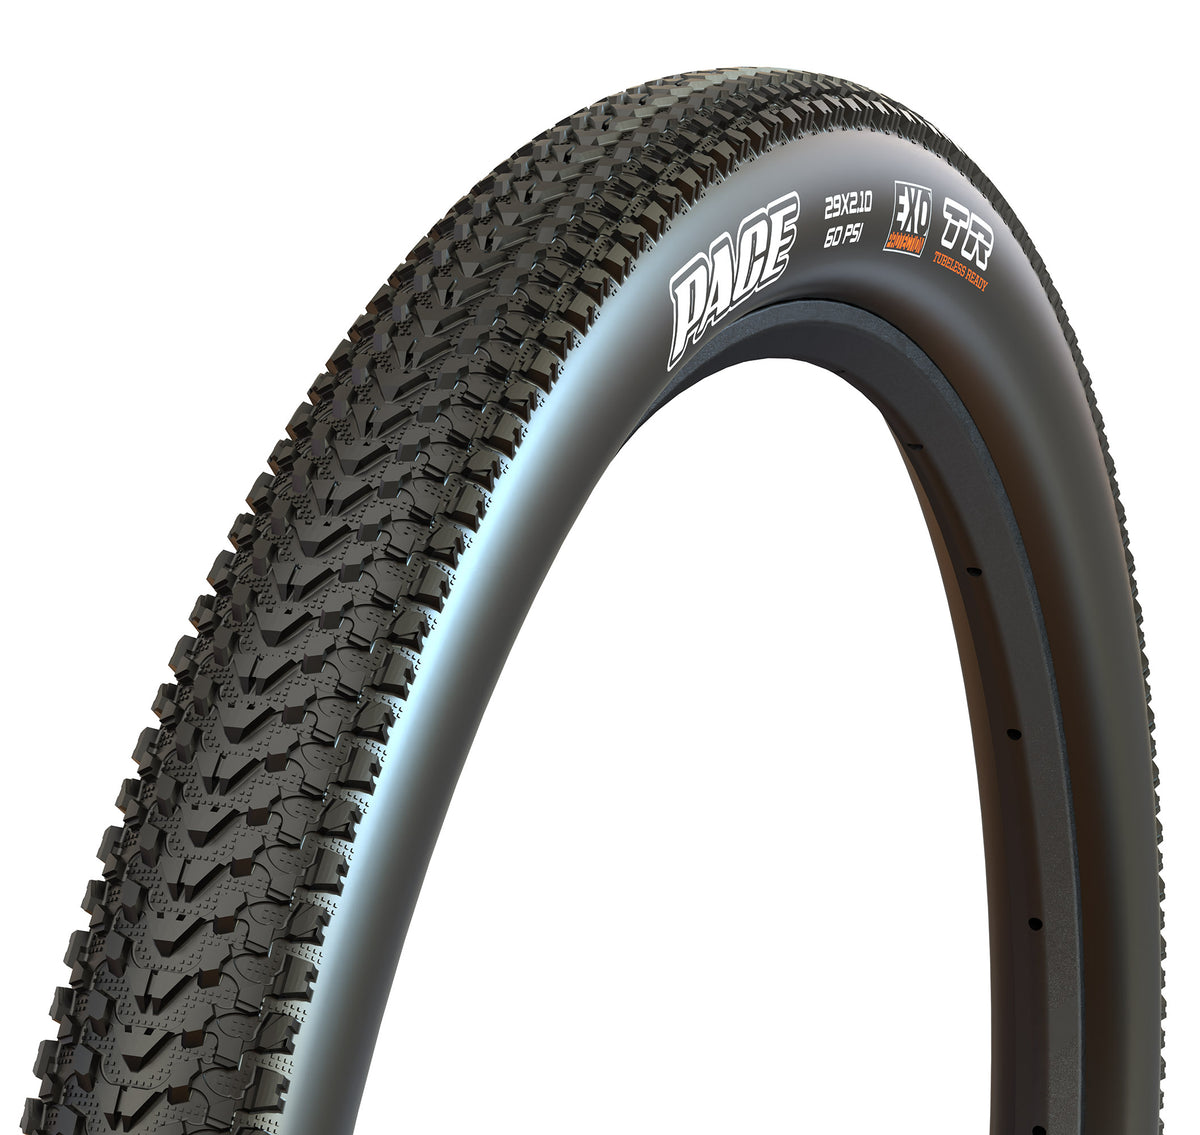 Maxxis Pace MTB Tyre